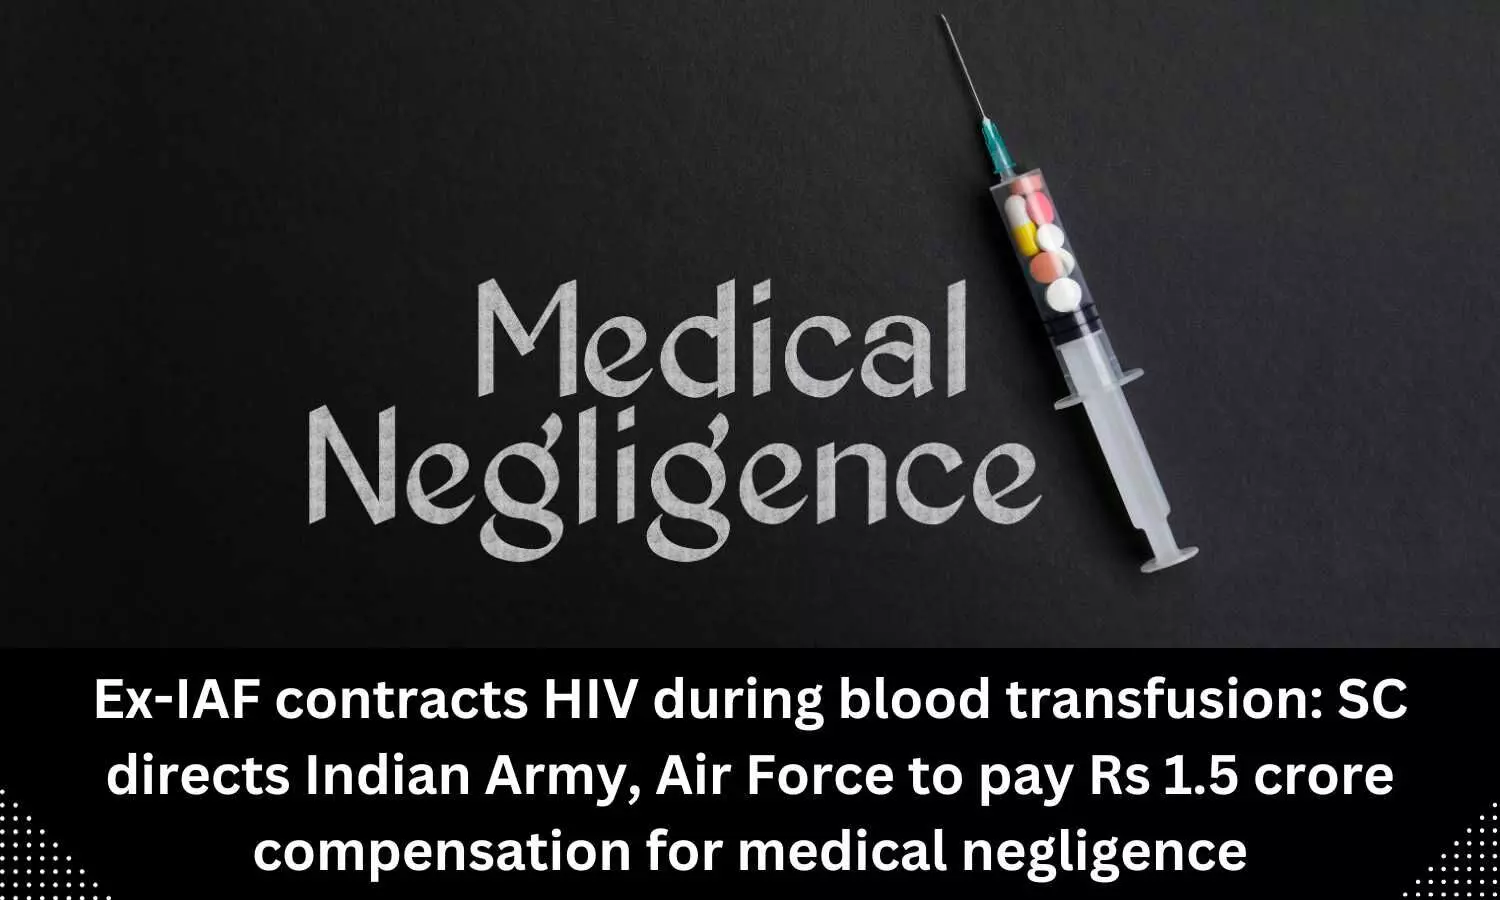 Medical negligence: SC directs Indian Army, Air Force to pay Rs 1.5 crore to veteran who contracted HIV during blood transfusion